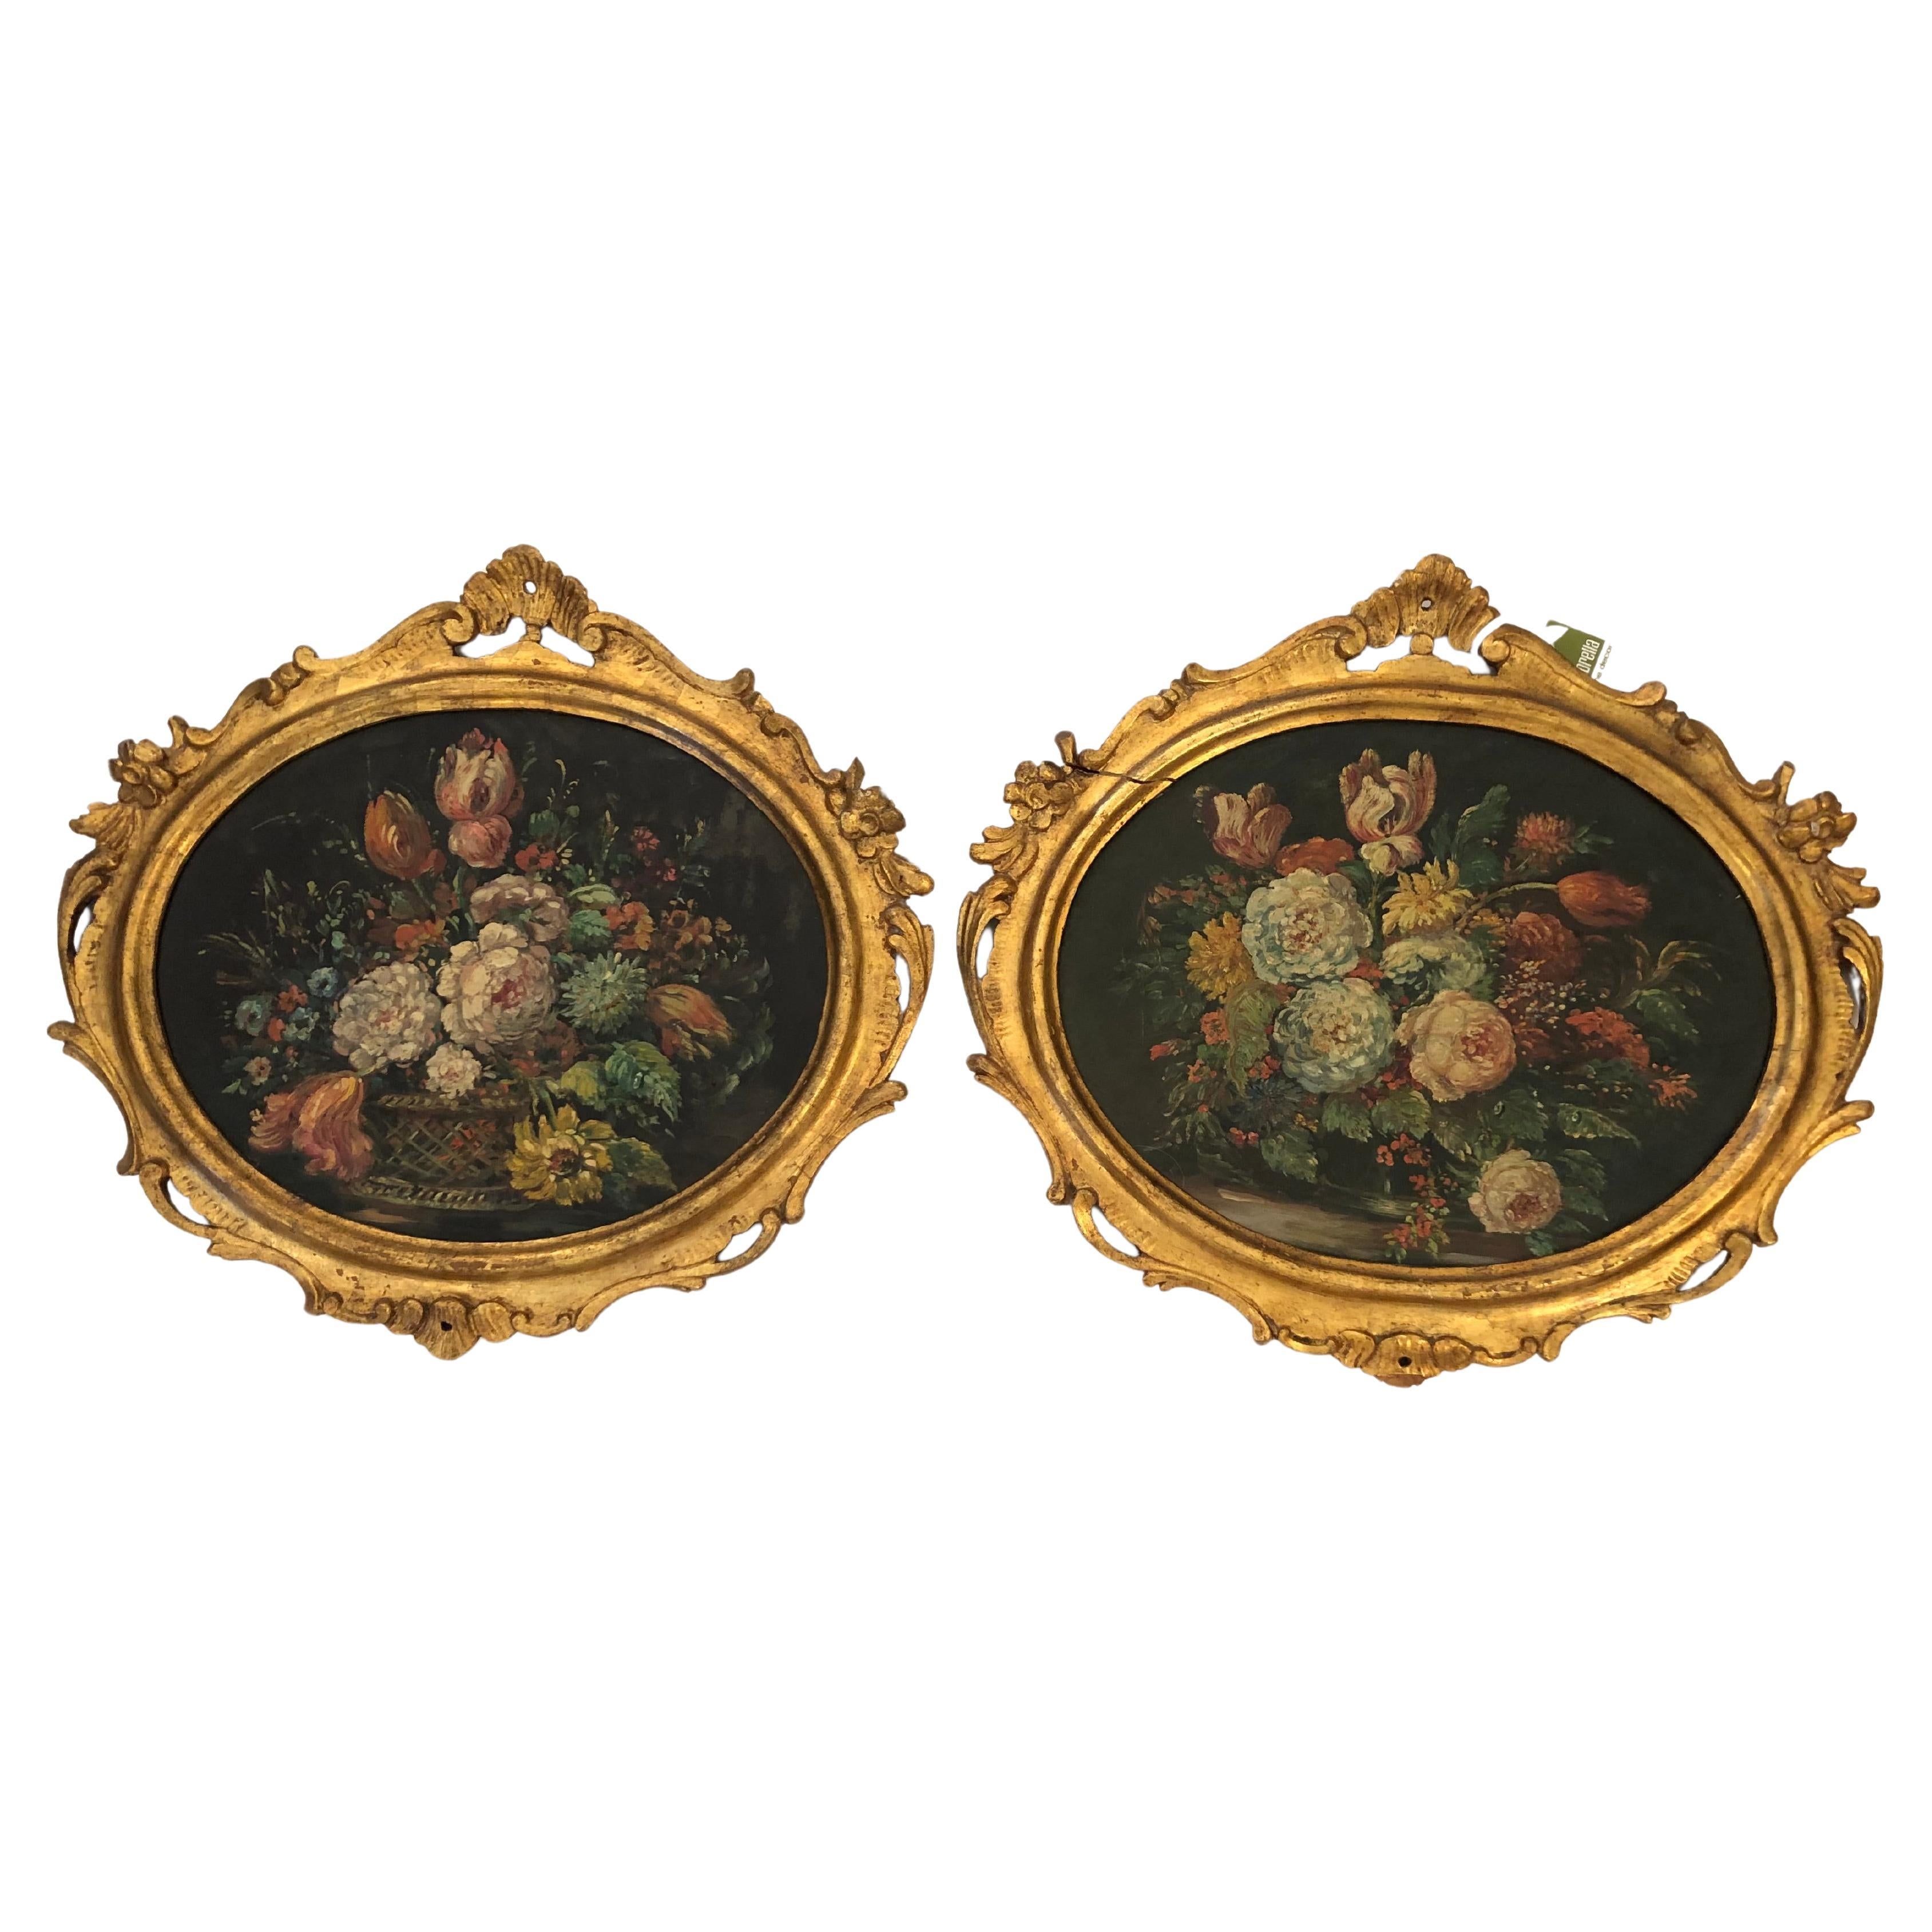 Pair of Charming European Oval Floral Still Lifes in Giltwood Frames